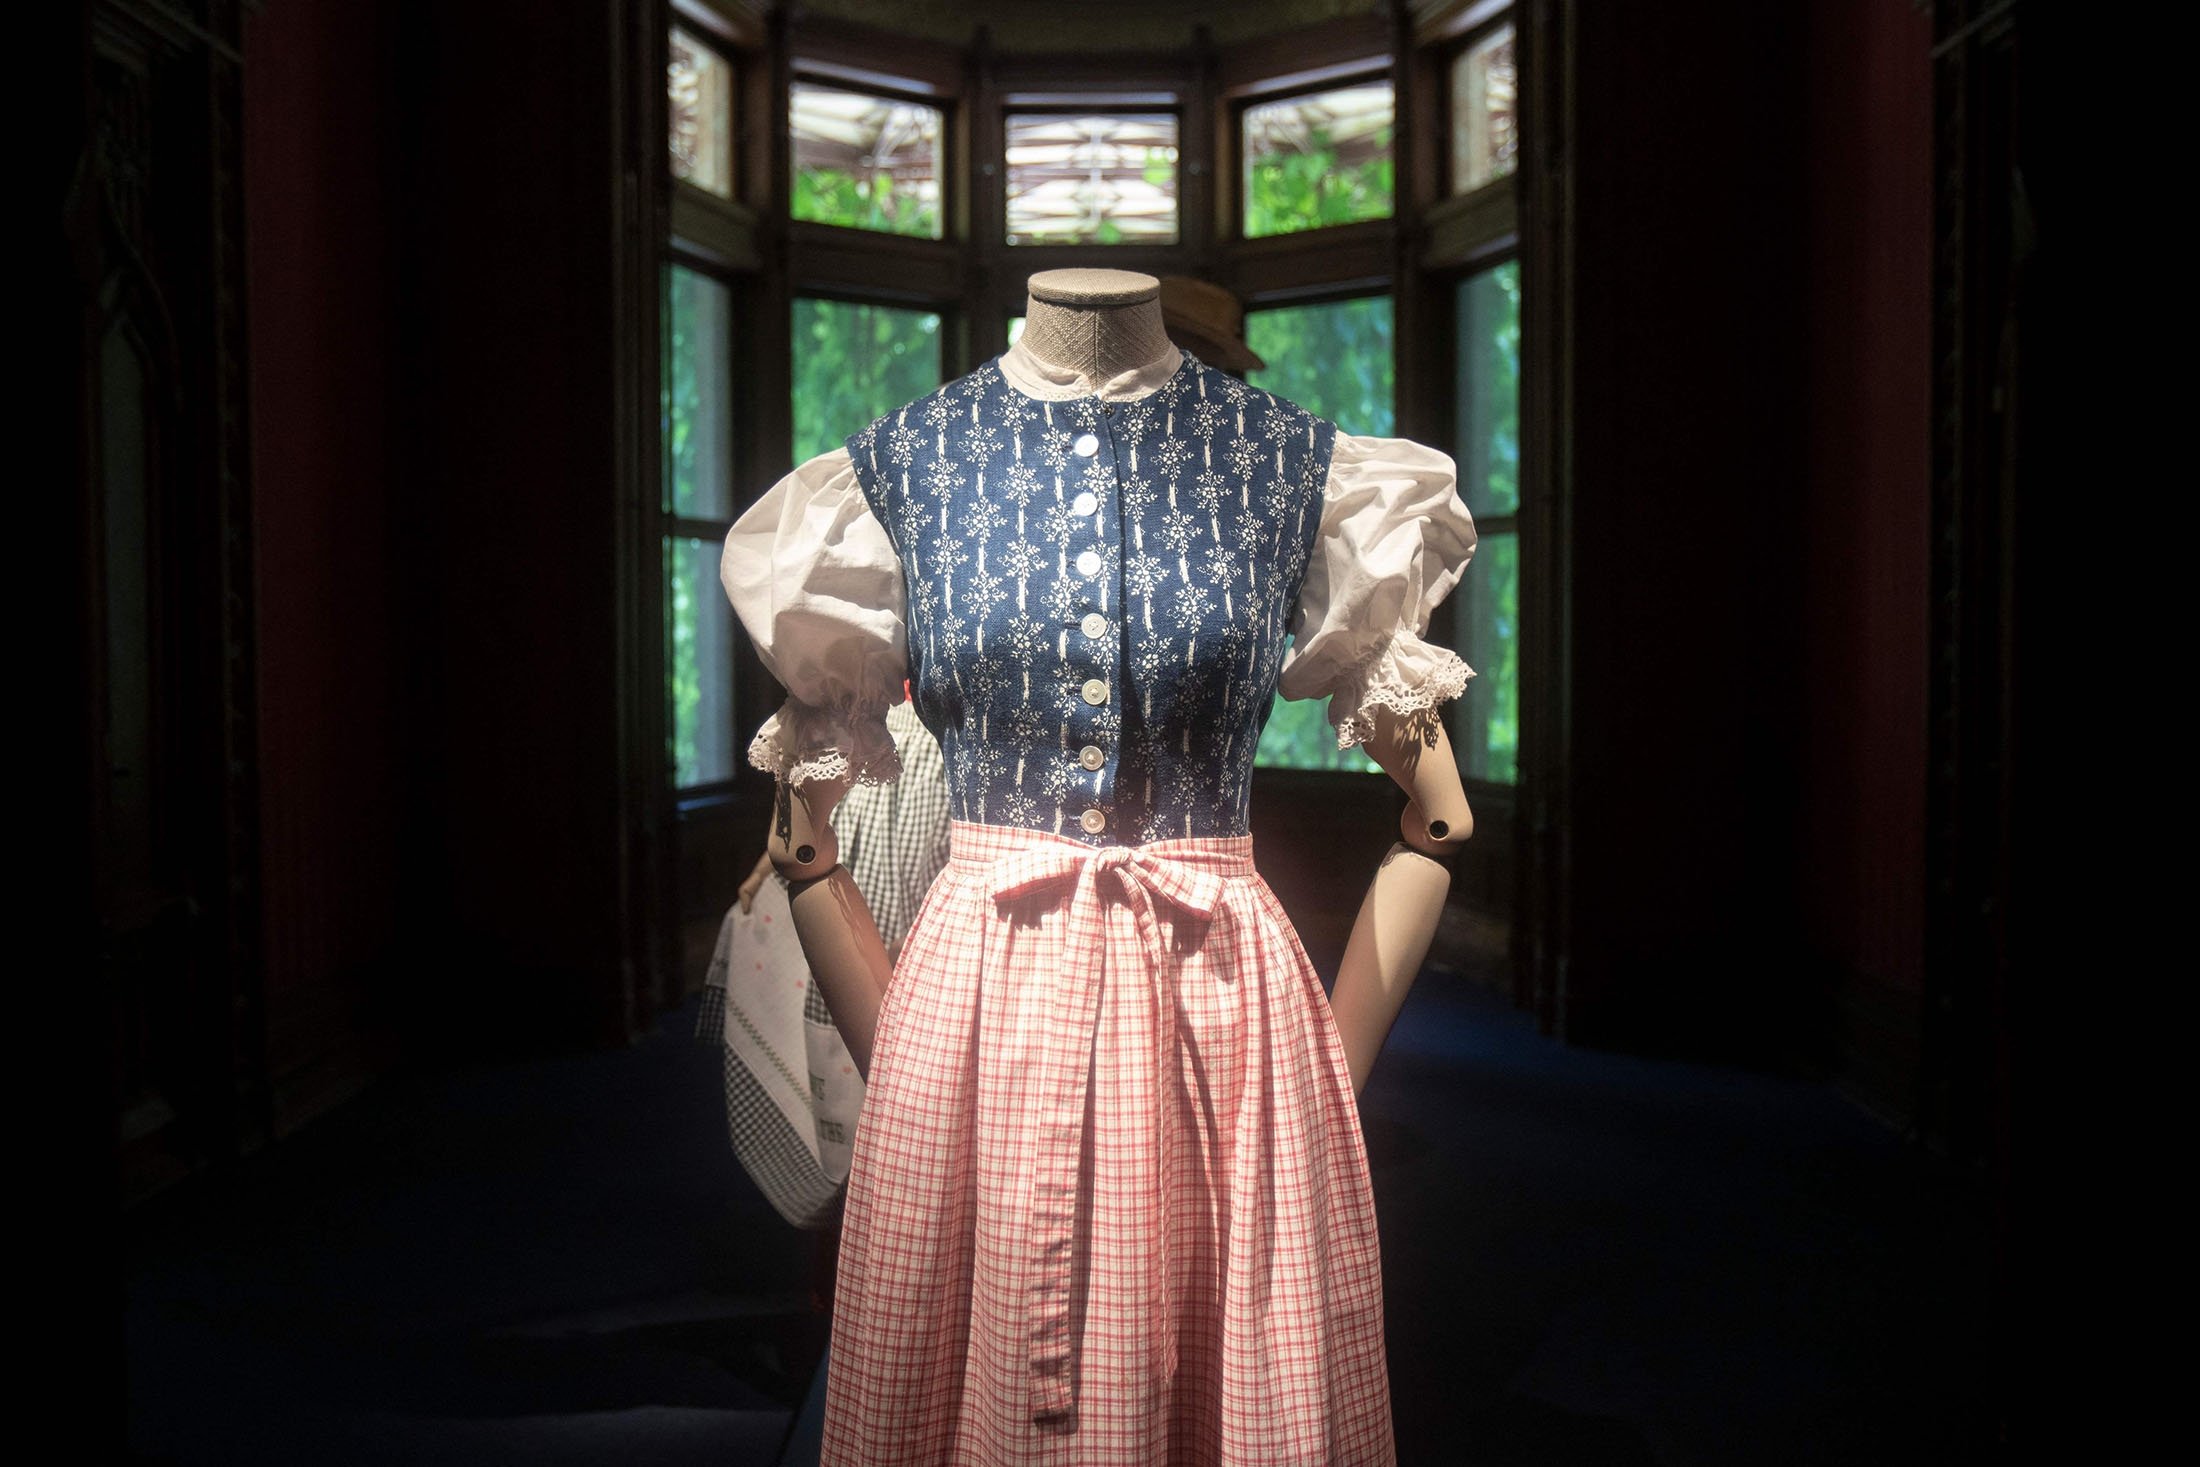 Dirndl dresses are on display at the exhibition "Dirndl – Tradition goes fashion" at the Mamorschloessl palace in Bad Ischl, Upper Austria, June 24, 2021. (AFP Photo)